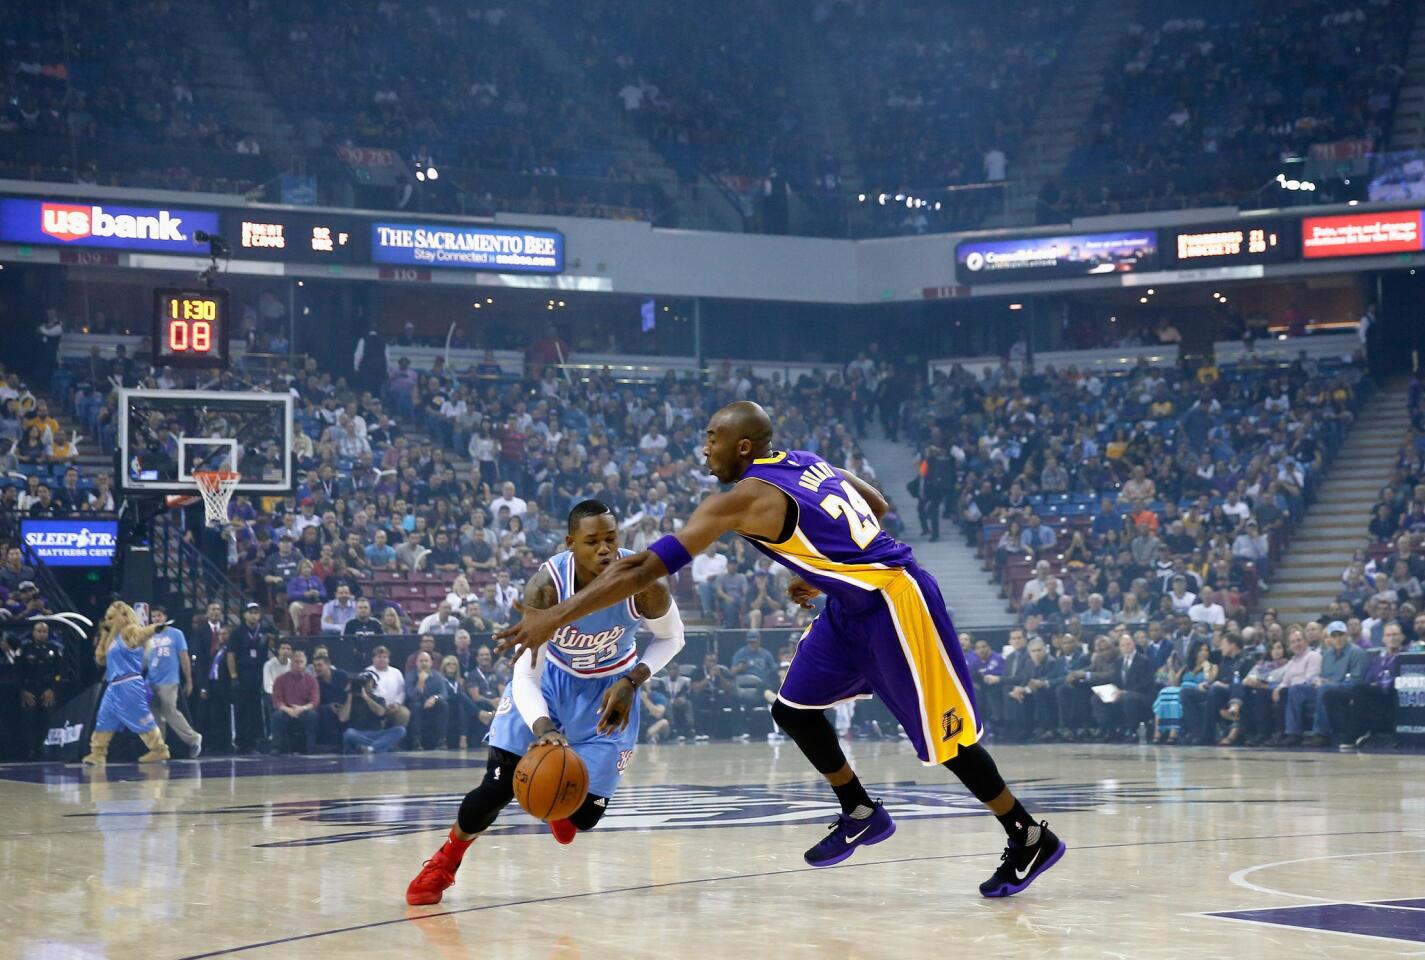 Nothing to say in Lakers' defense after 132-114 loss to Kings